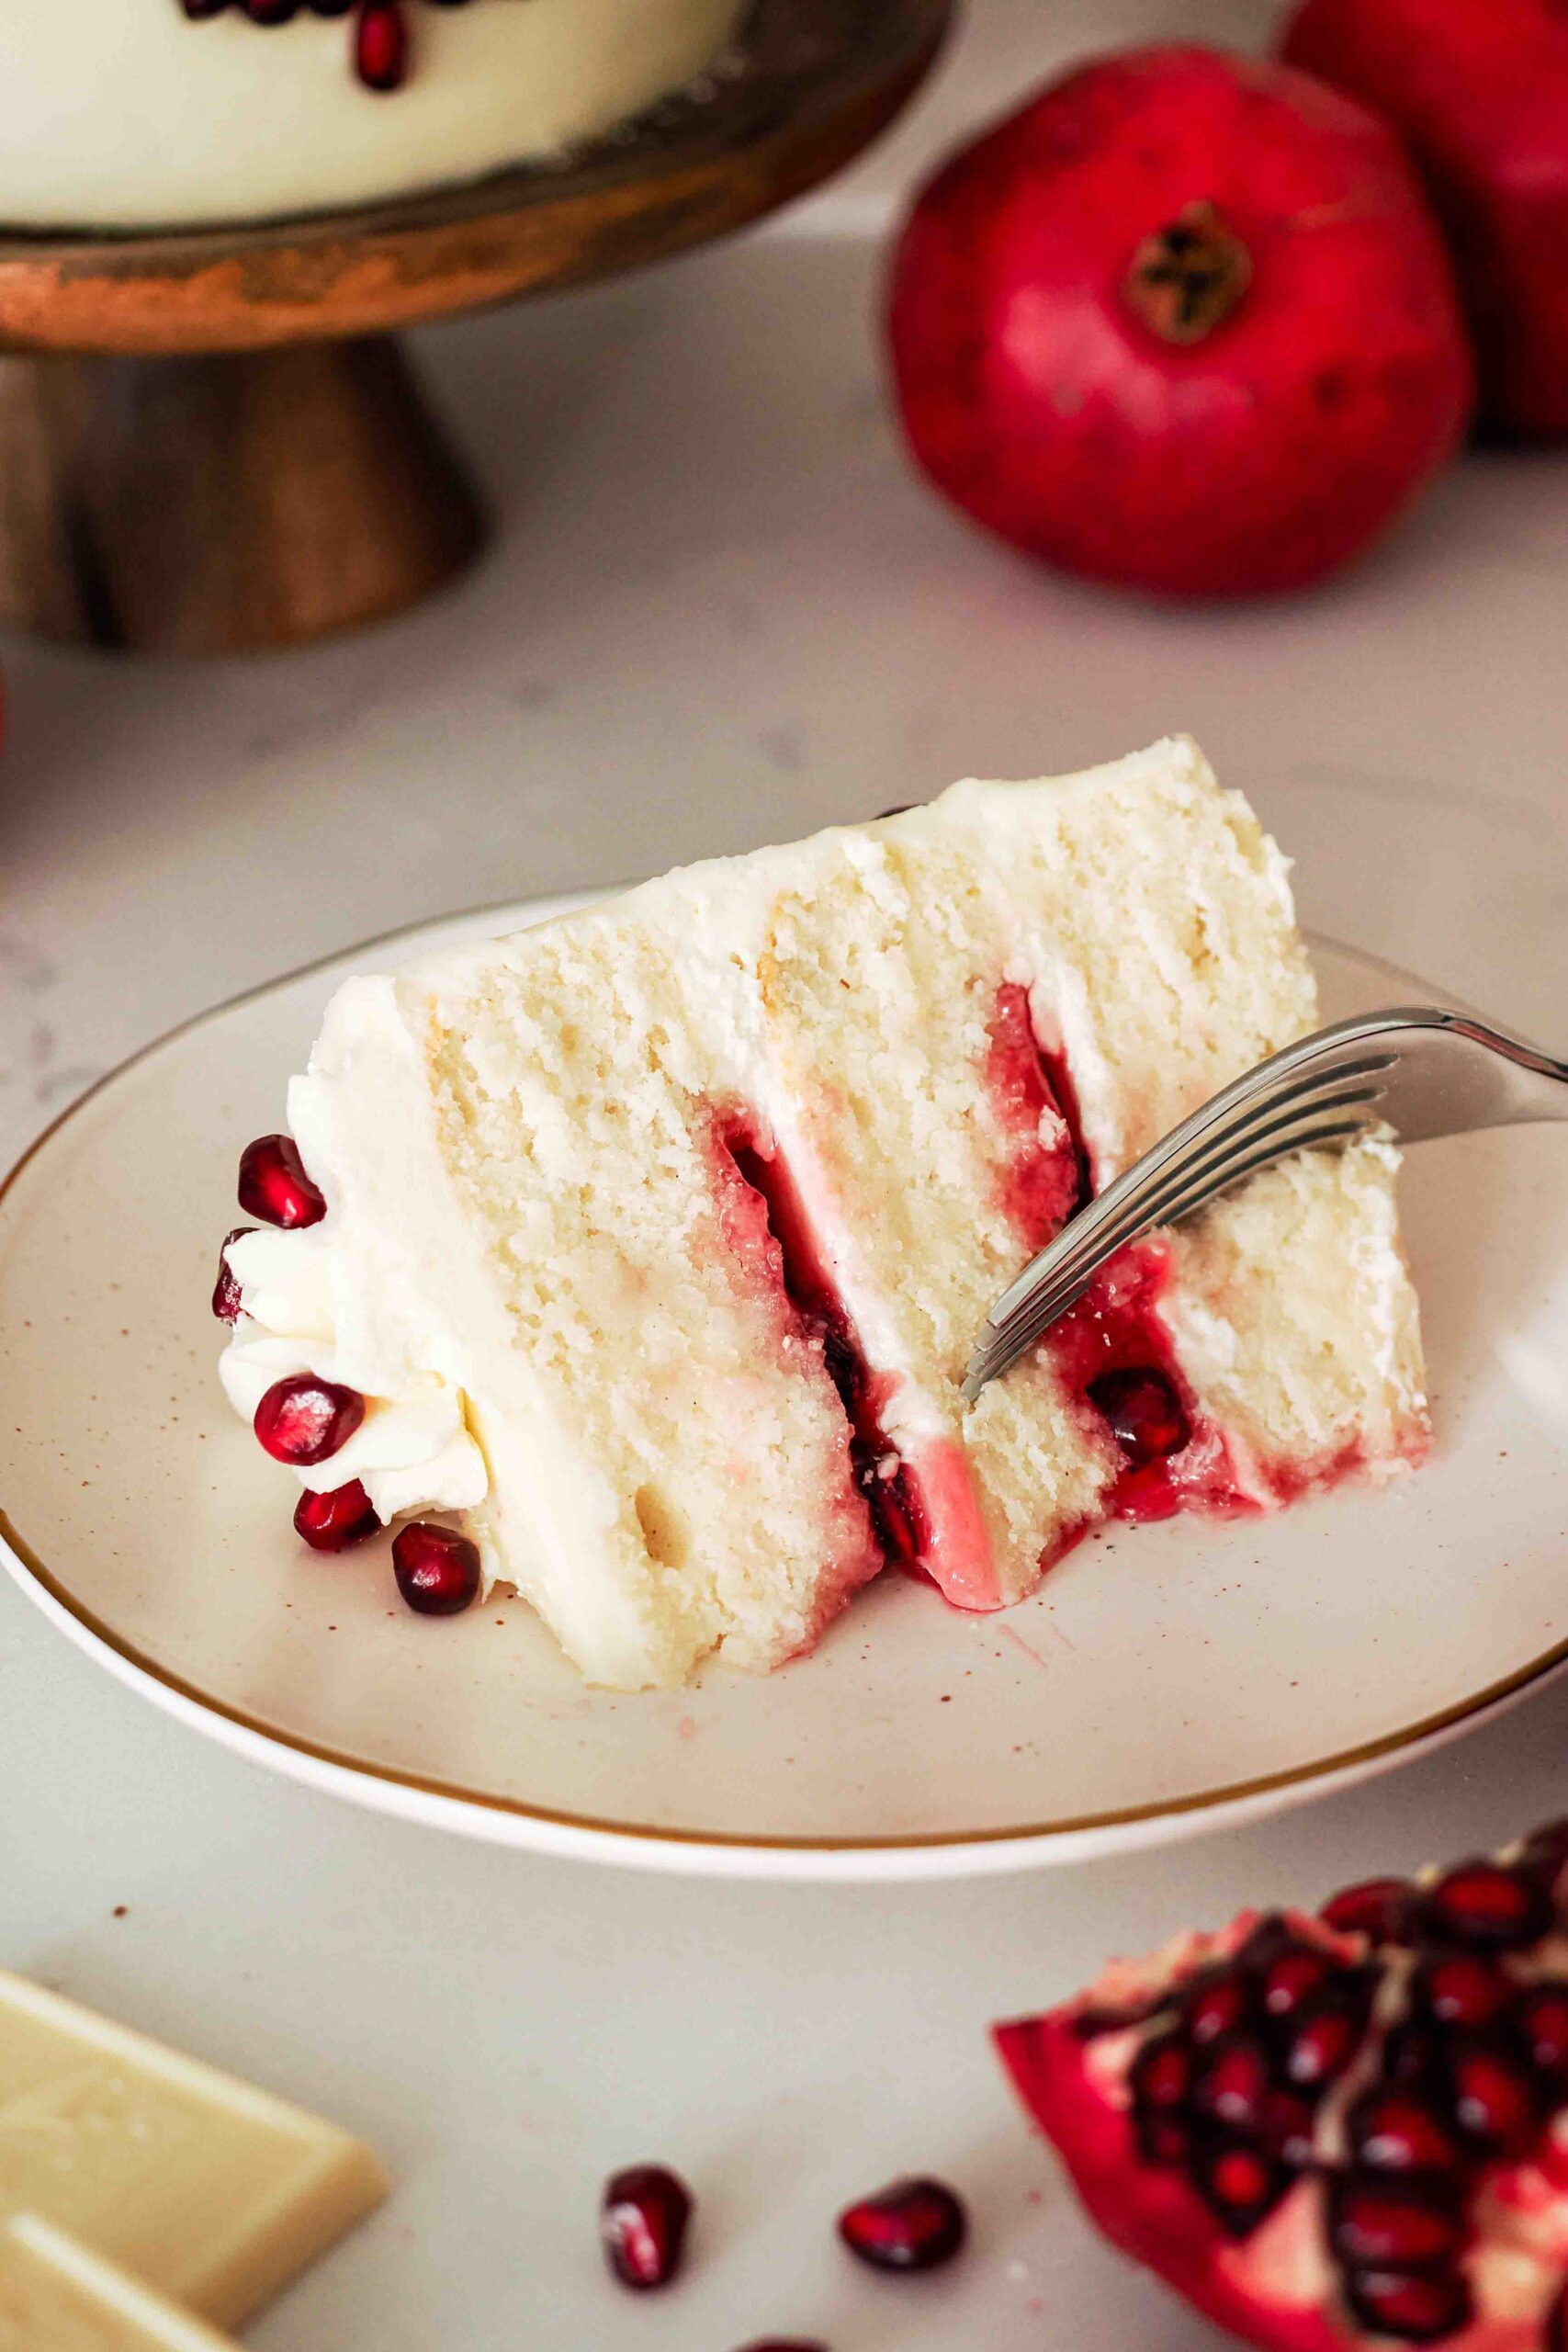 A slice of white chocolate pomegranate cake on its side and a fork taking a bite out of it.